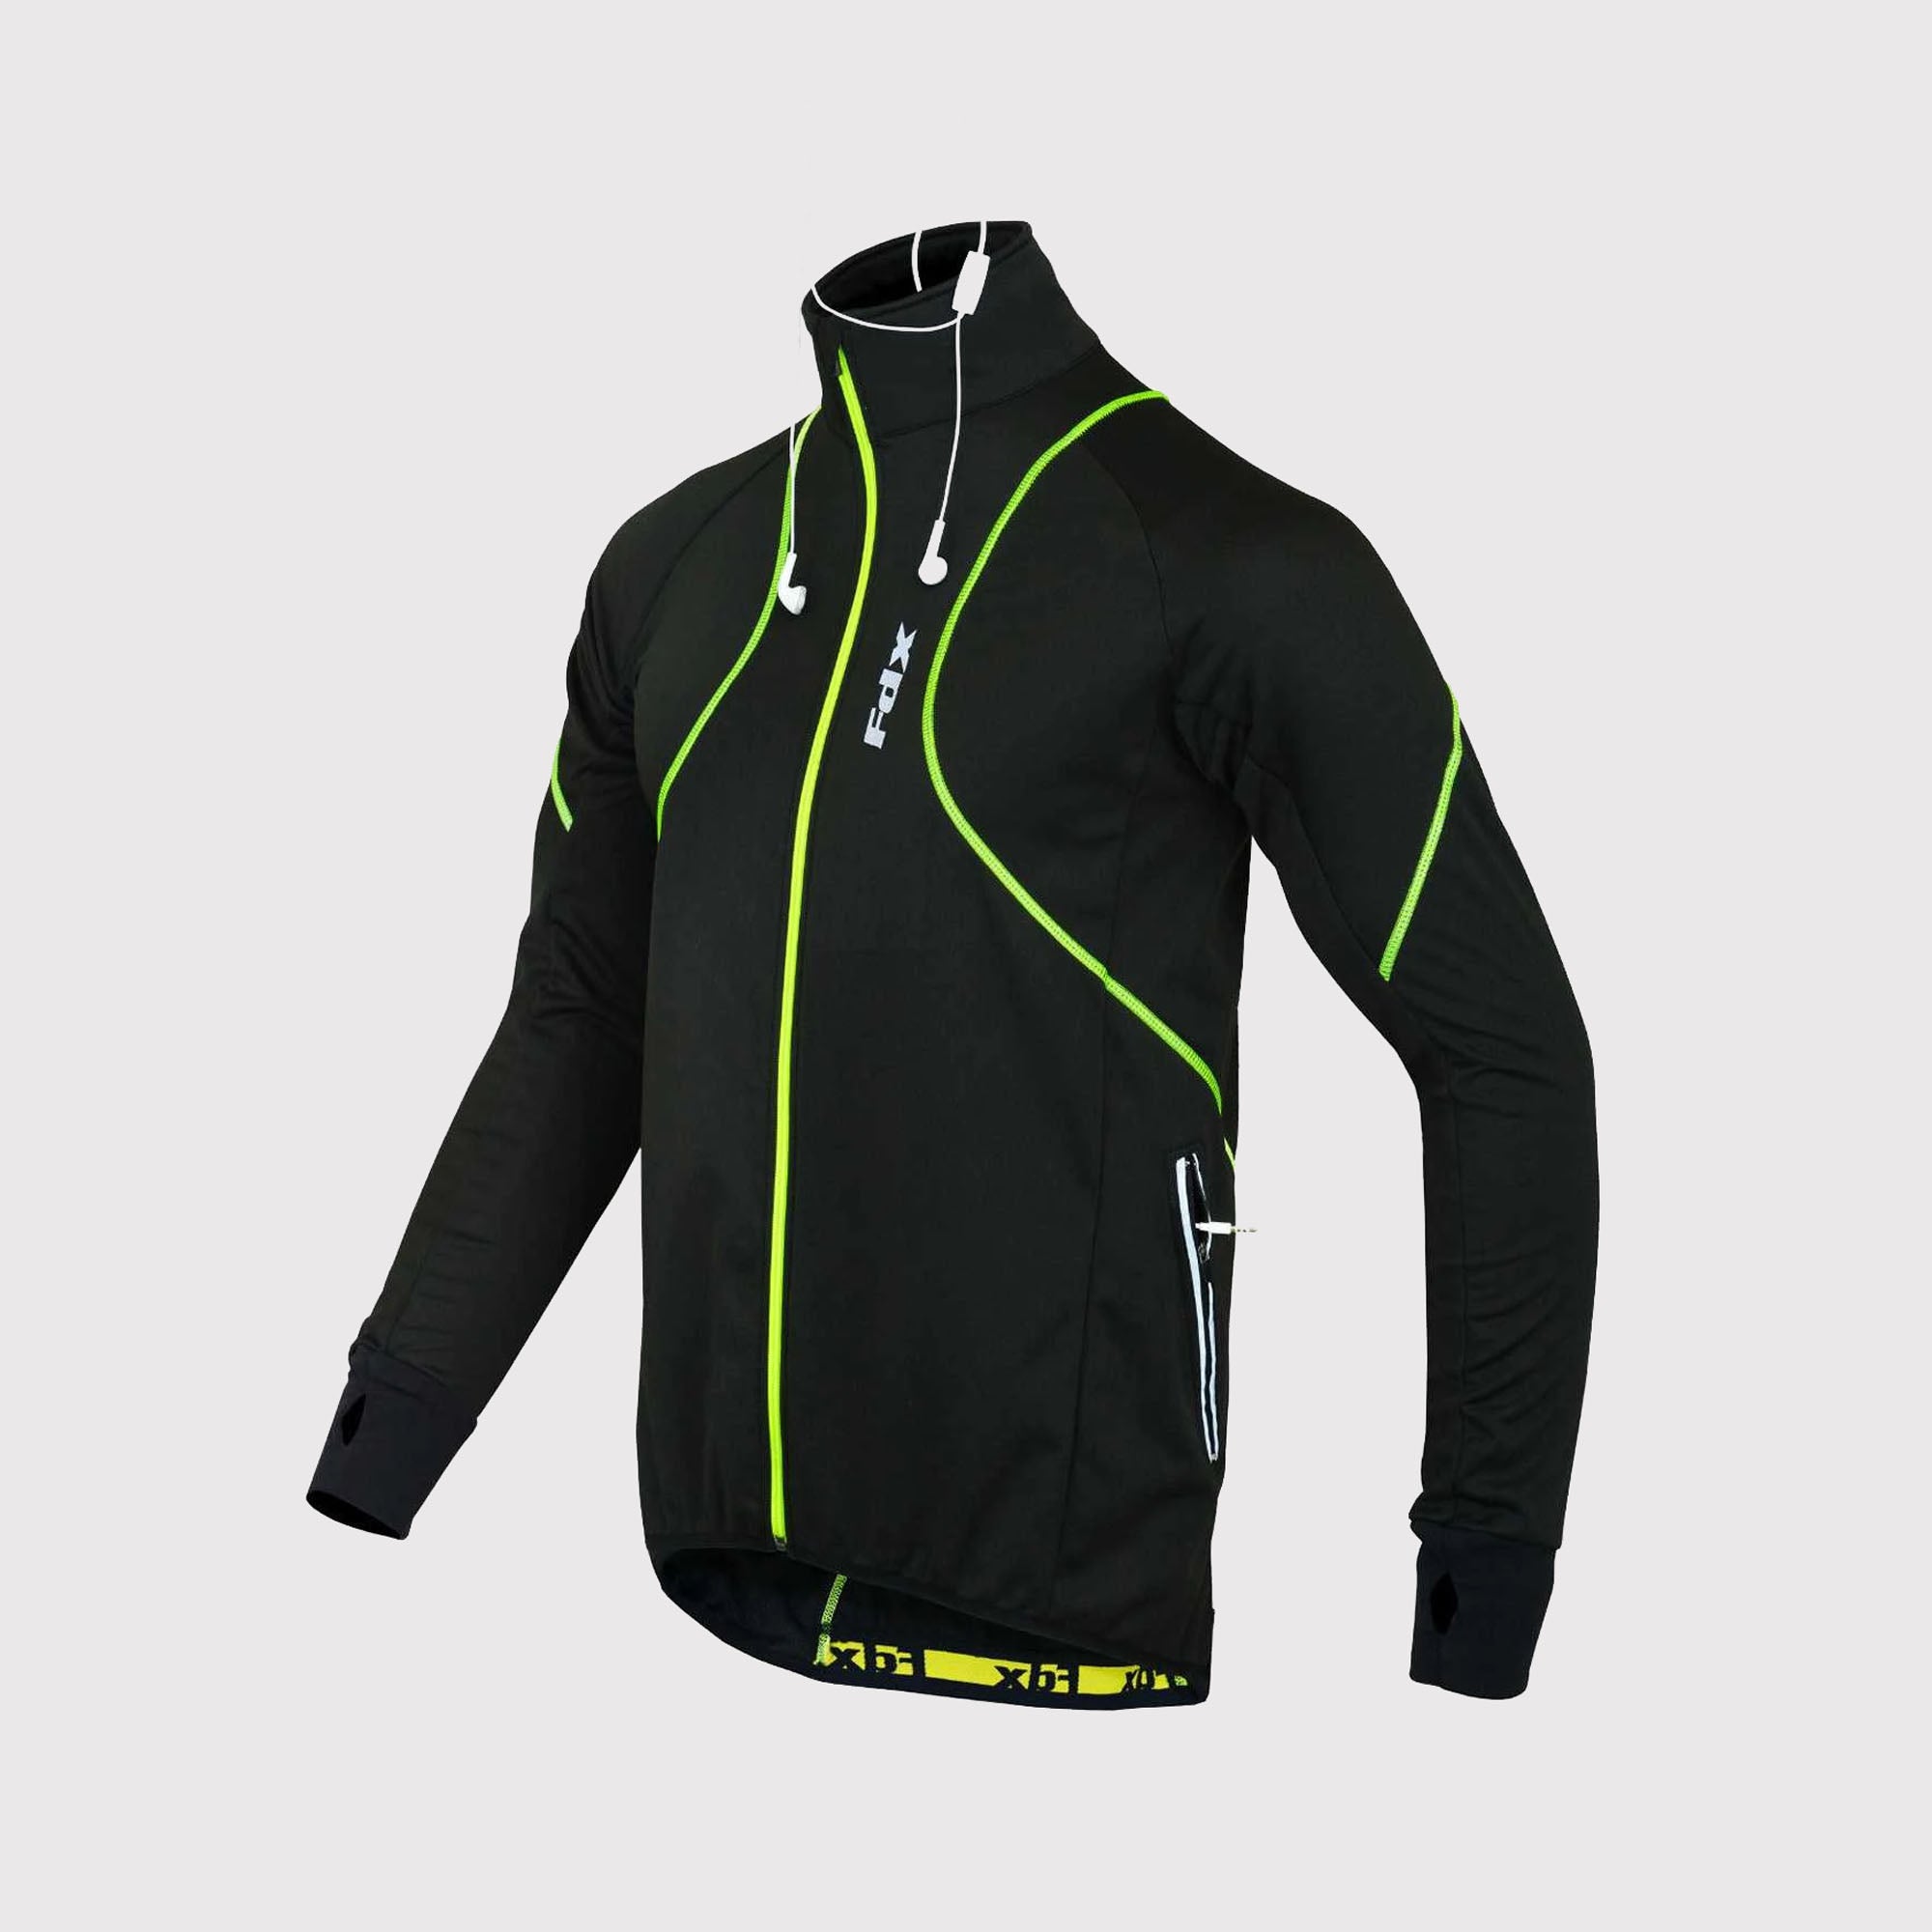 Fdx Mens Black & Green Cycling Jacket for Winter Thermal Casual Softshell Clothing Lightweight, Windproof, Waterproof & Pockets - Gustt